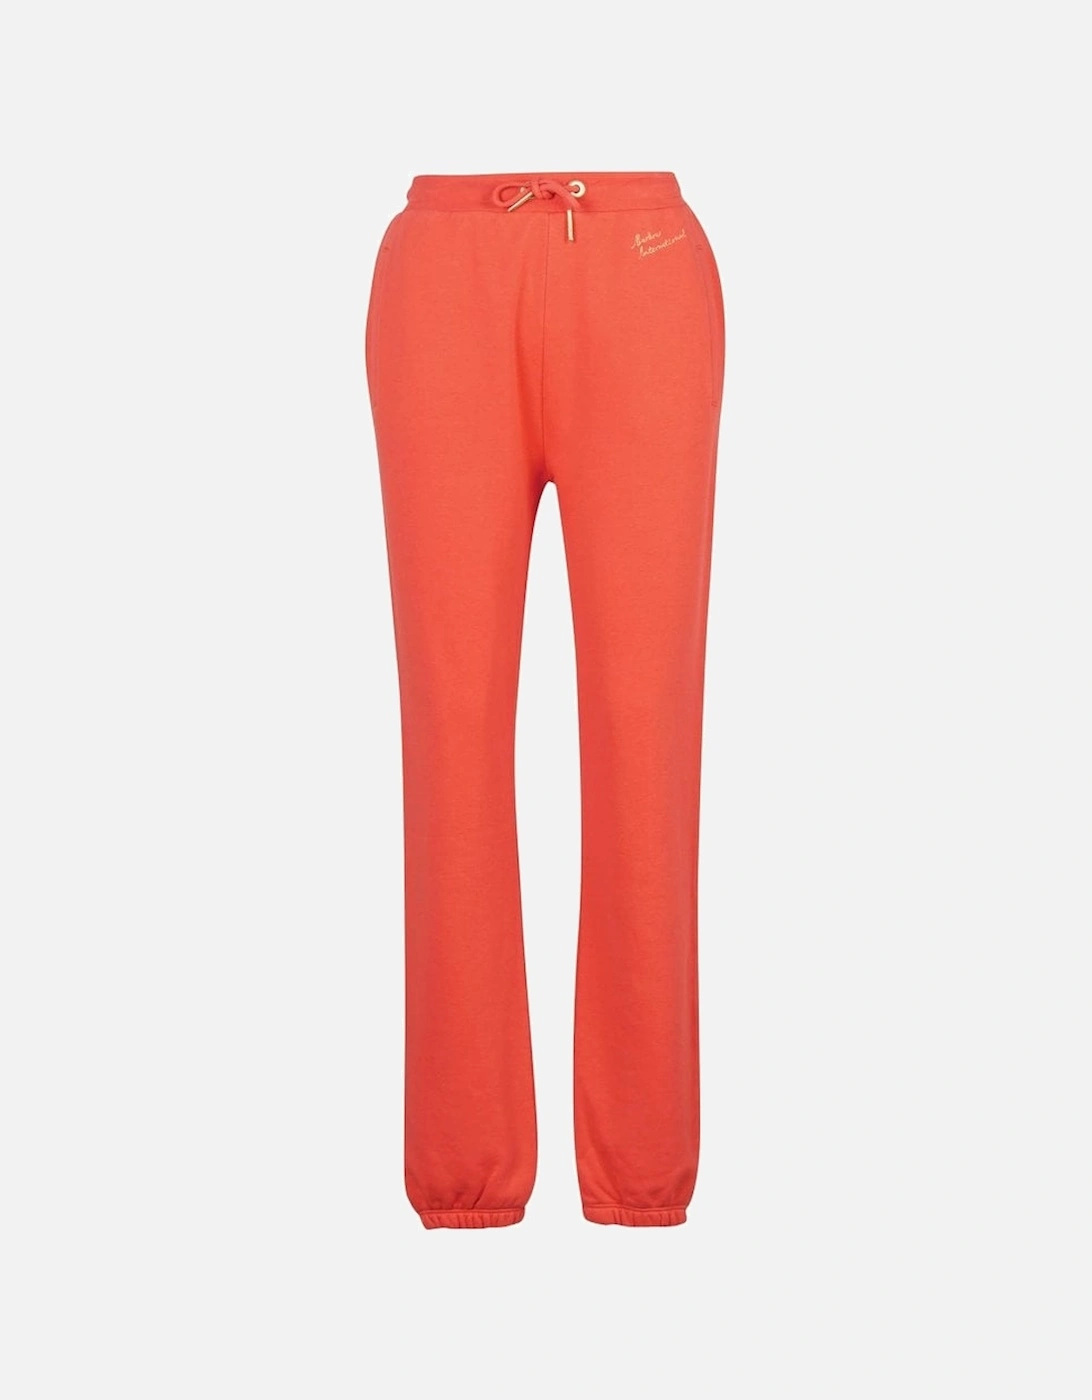 International Women's Alonso Cotton Jogging pants In Coral, 4 of 3